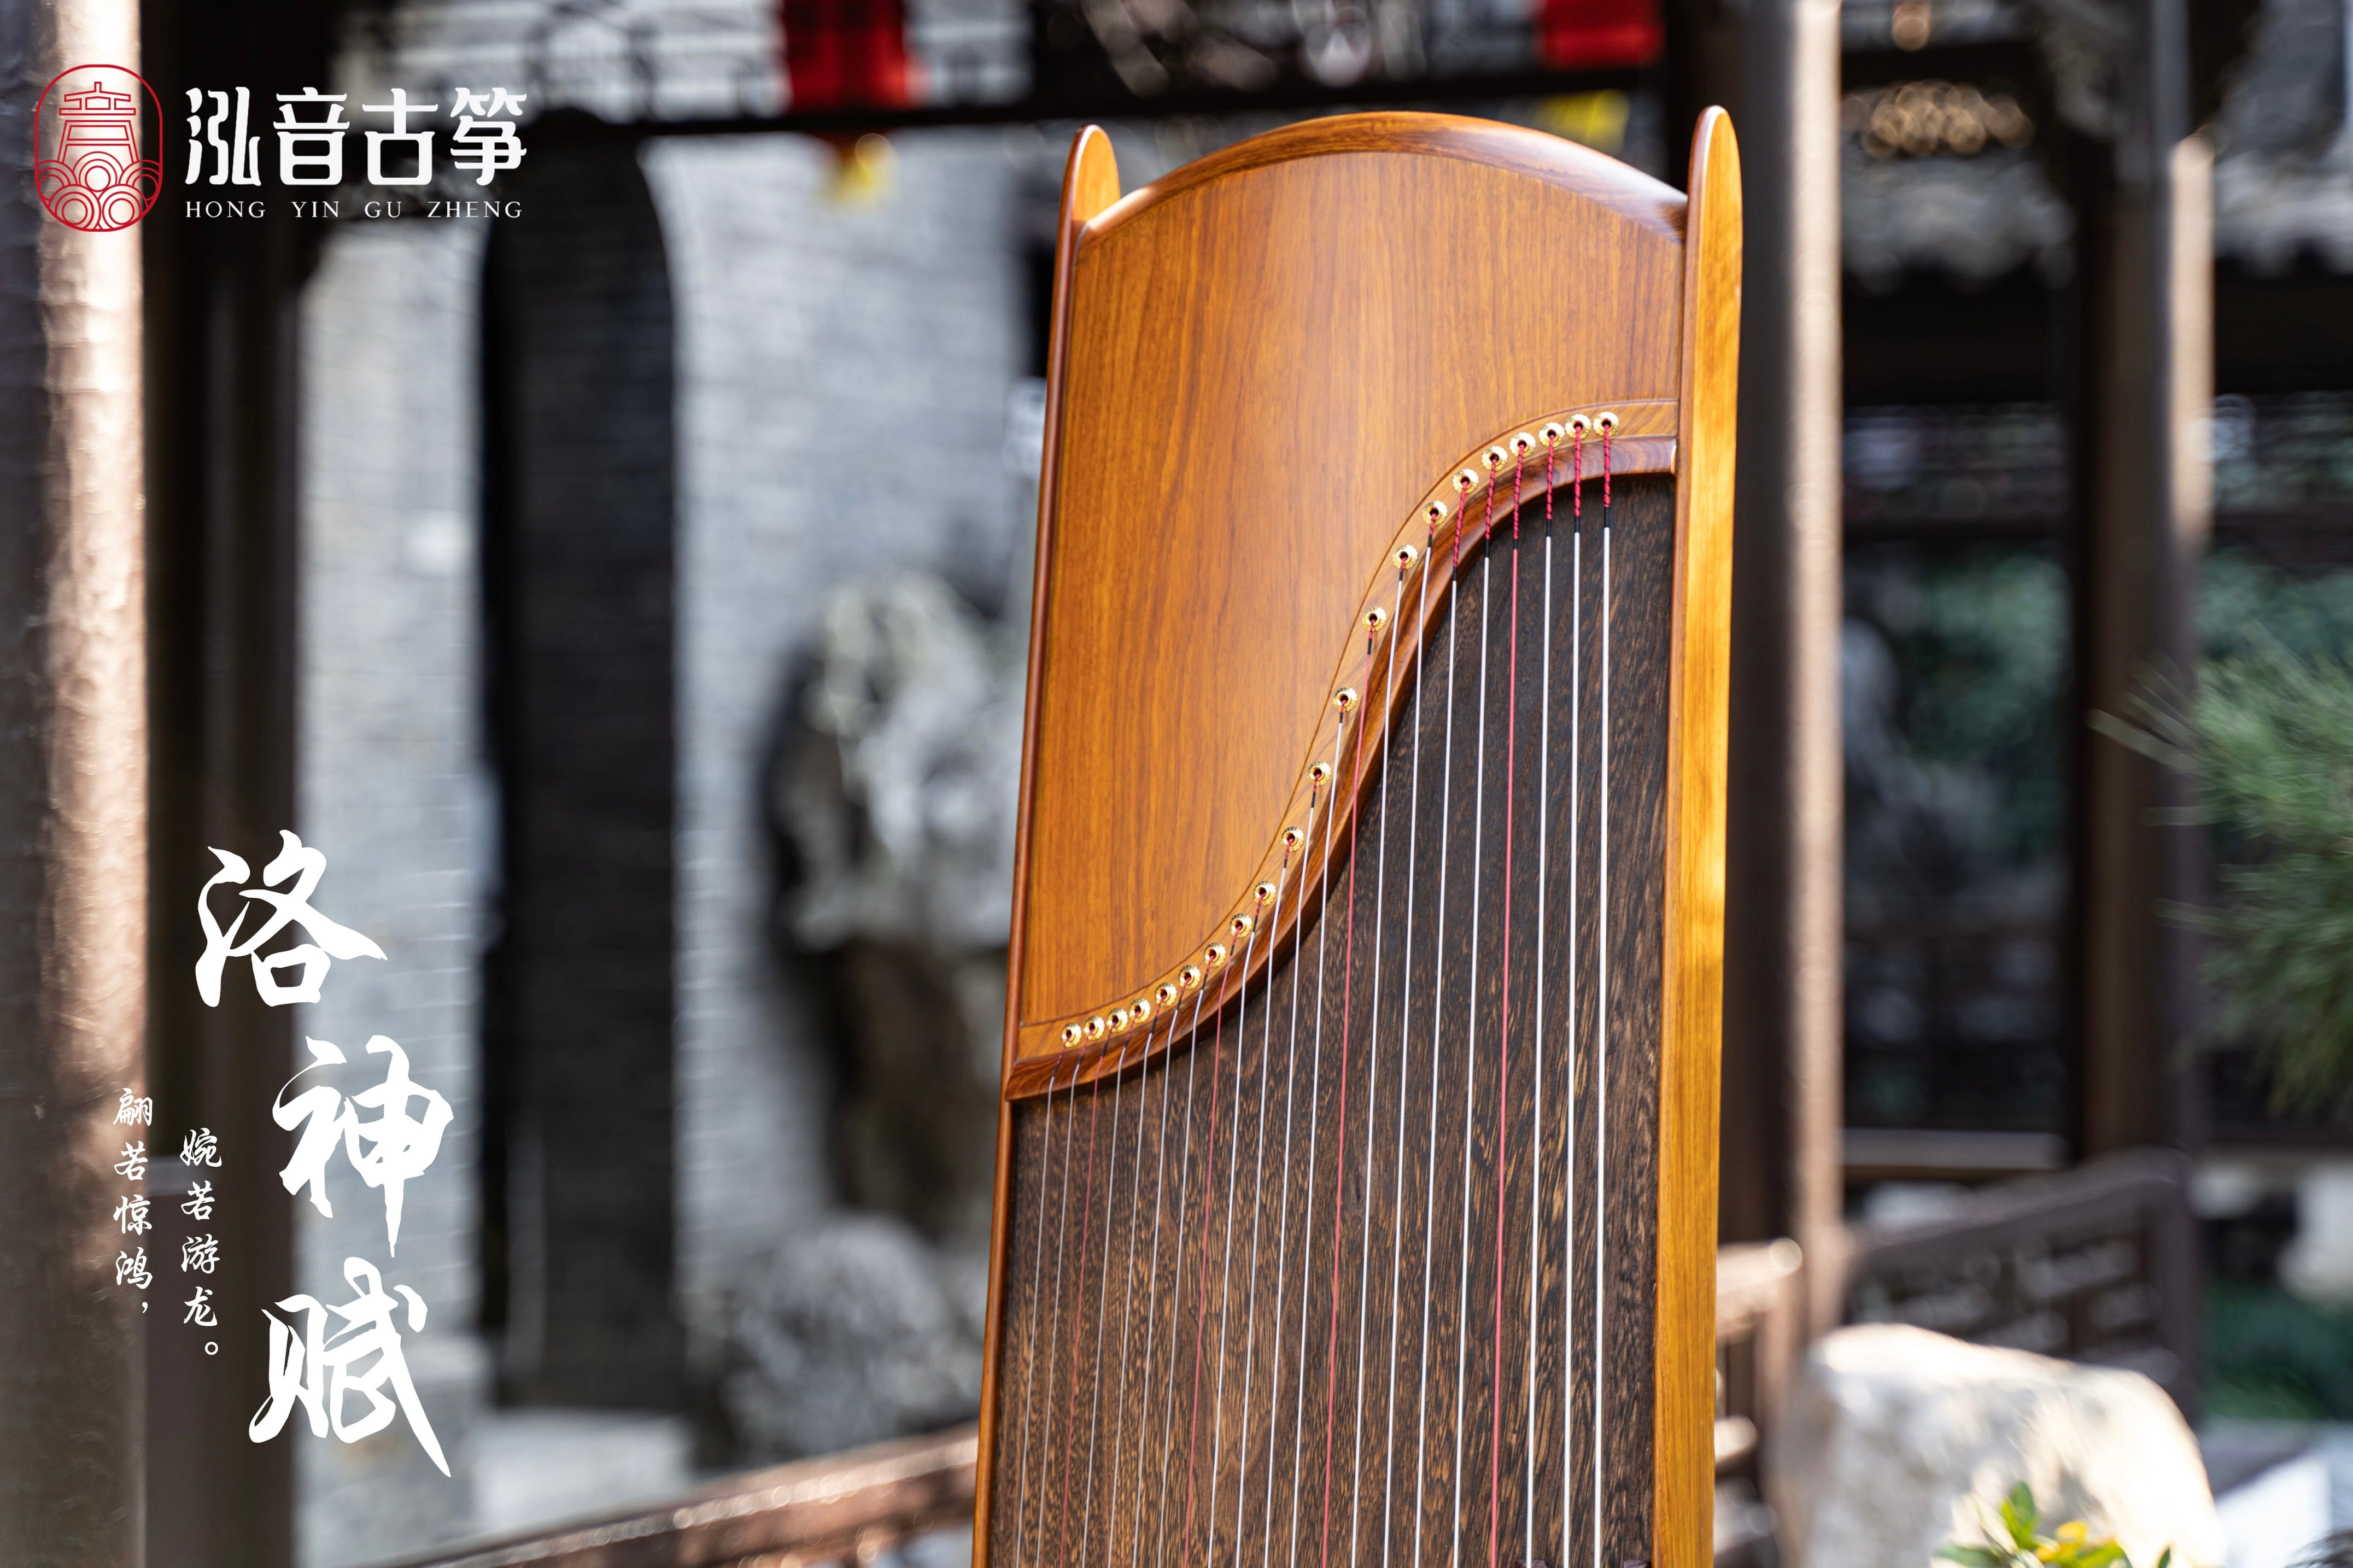 Hongyin 64in Fragrant Rosewood Carved Guzheng “Luo Shen Fu” at 